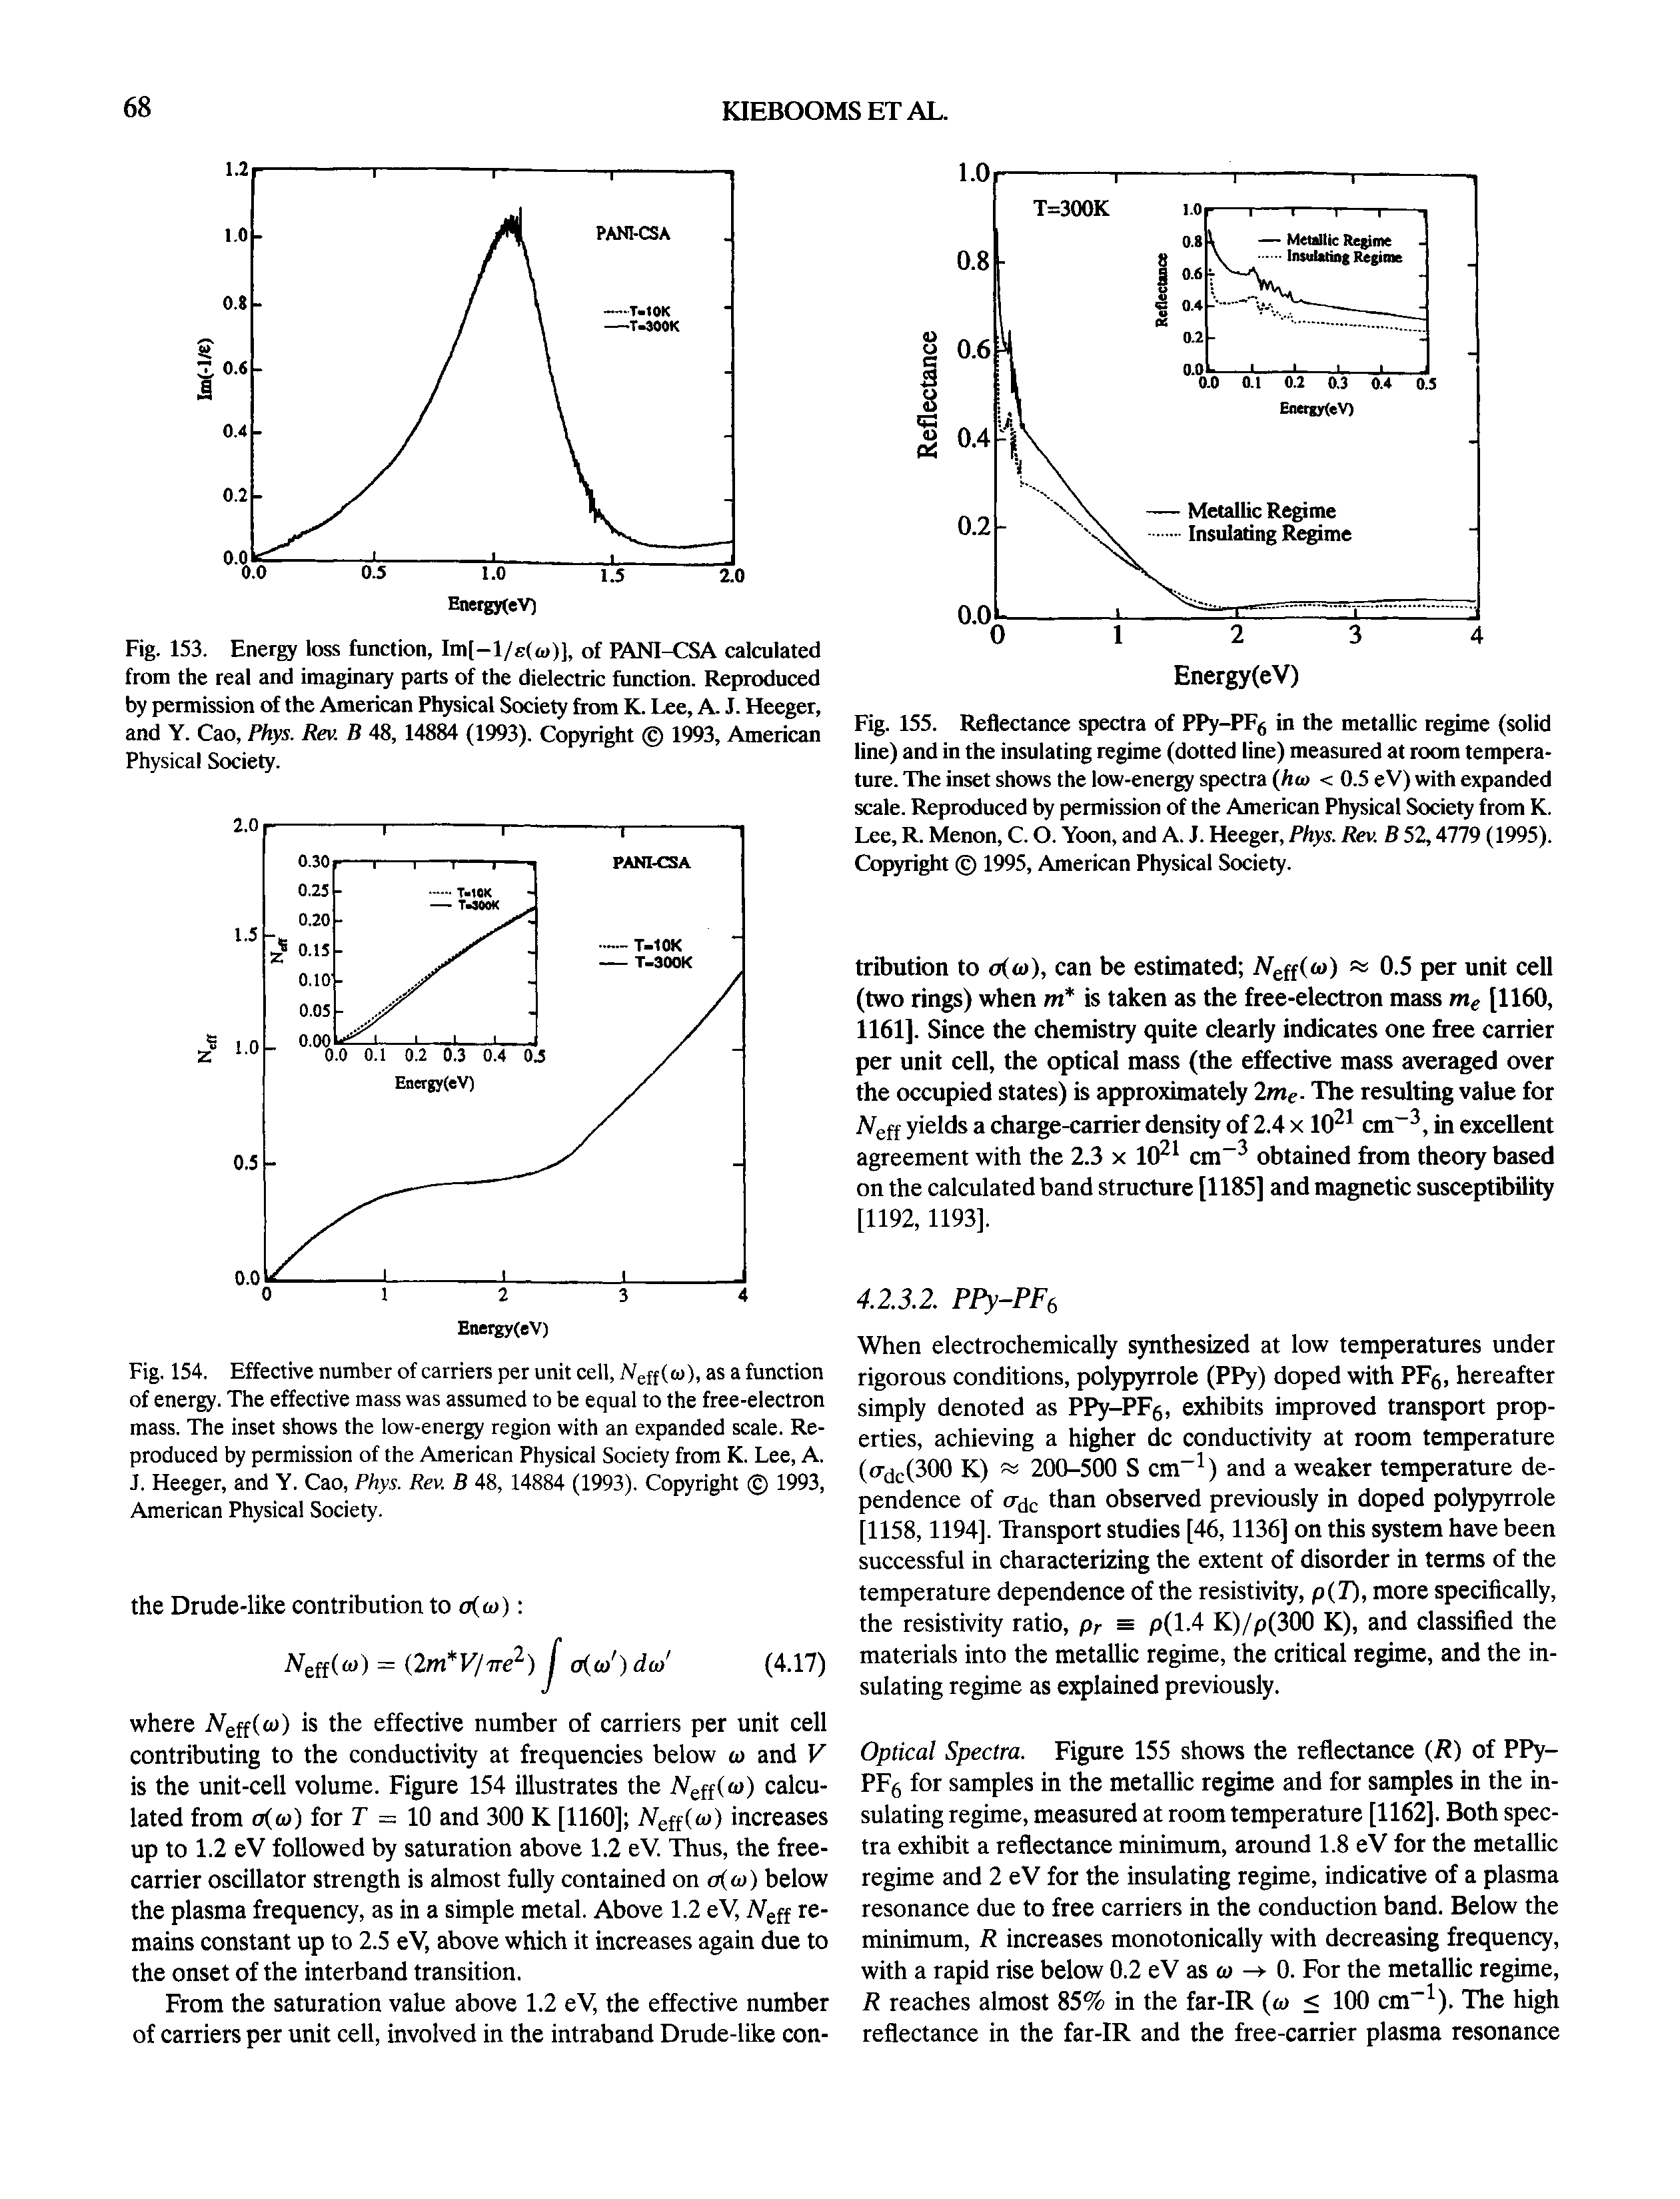 Fig. 153. Energy loss function, Im[-l/e( tf)], of PANI-CSA calculated from the real and imaginary parts of the dielectric function. Reproduced by permission of the American Physical Society from K. Lee, A. J. Heeger, and Y. Cao, Phys. Rev. B 48, 14884 (1993). Copyright 1993, American Physical Society.